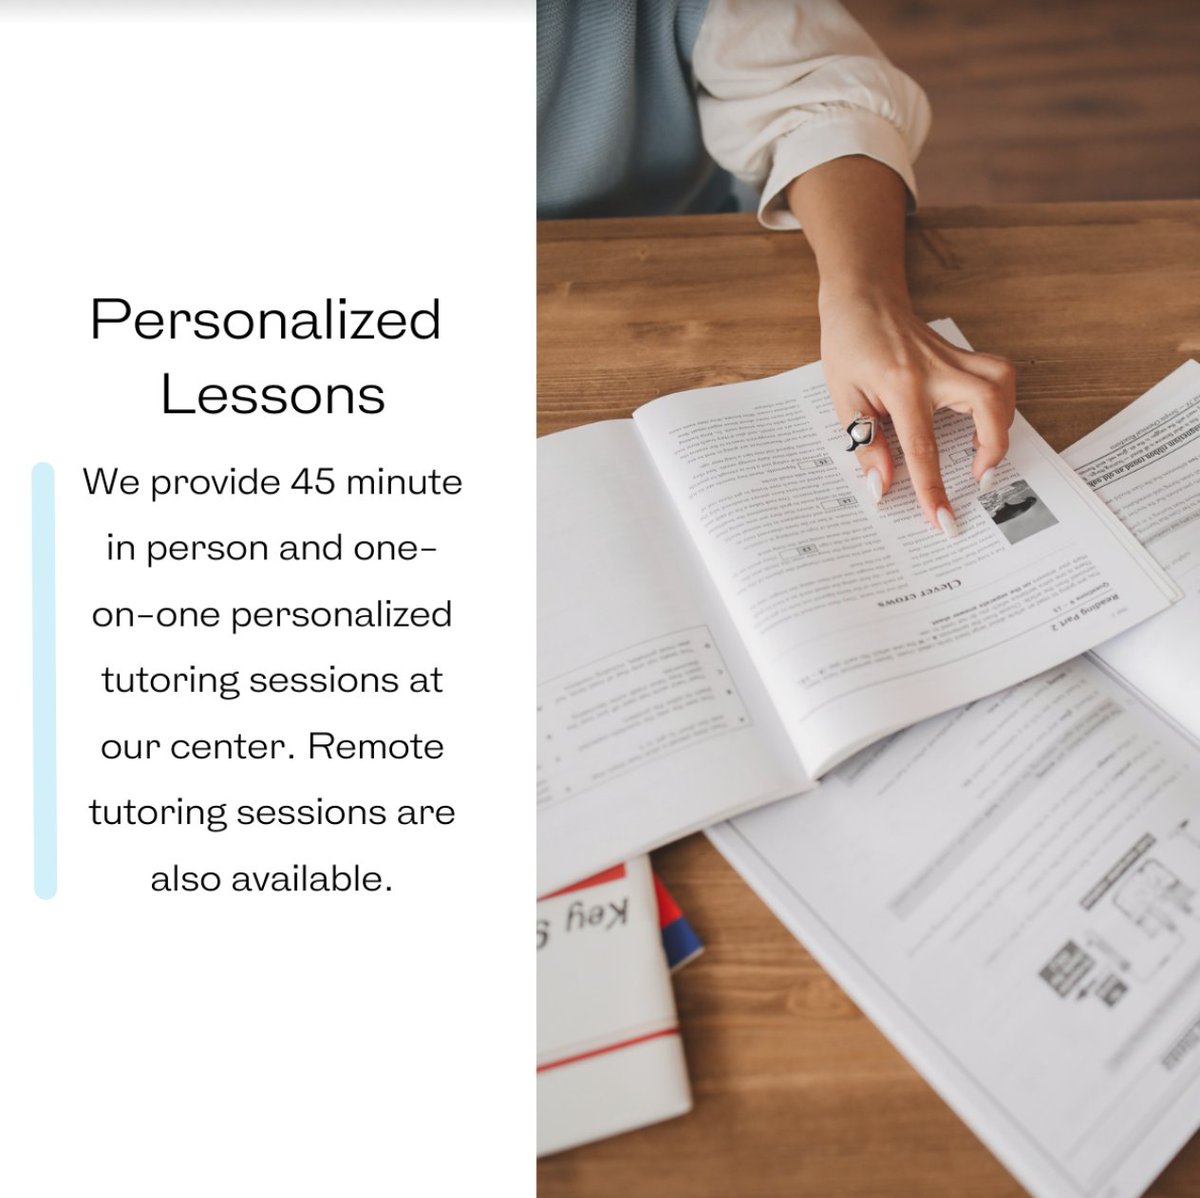 At our center, we focus on YOU during our sessions. Each session is individualized and private to ensure your children receive the best quality tutoring or mentoring possible. 
.
.
#privatetutoring #privatementoring #mentor #academicmentor #BMLC